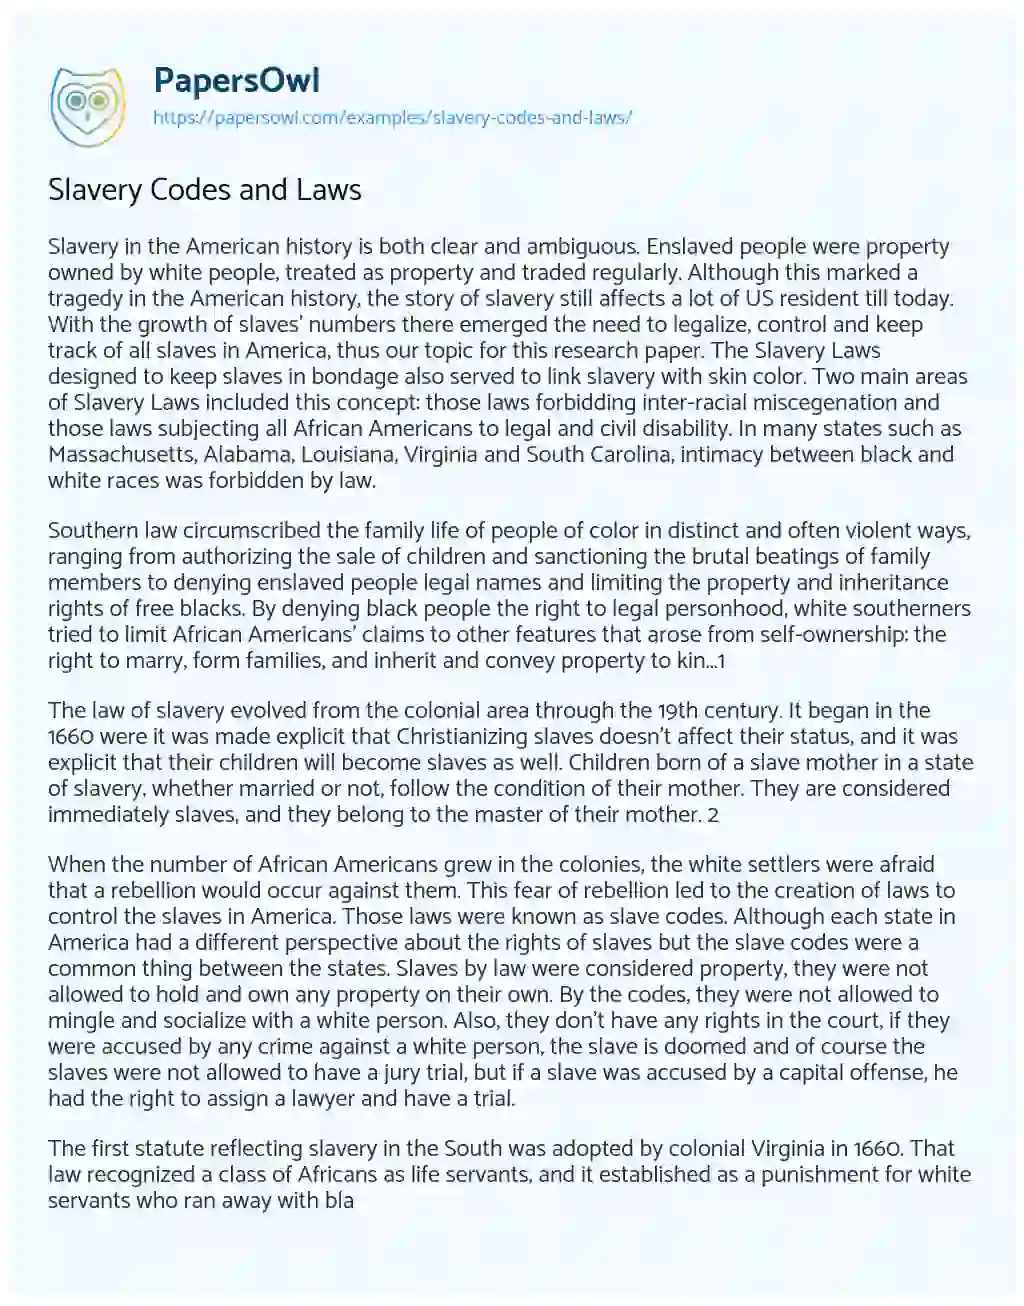 Slavery Codes and Laws essay